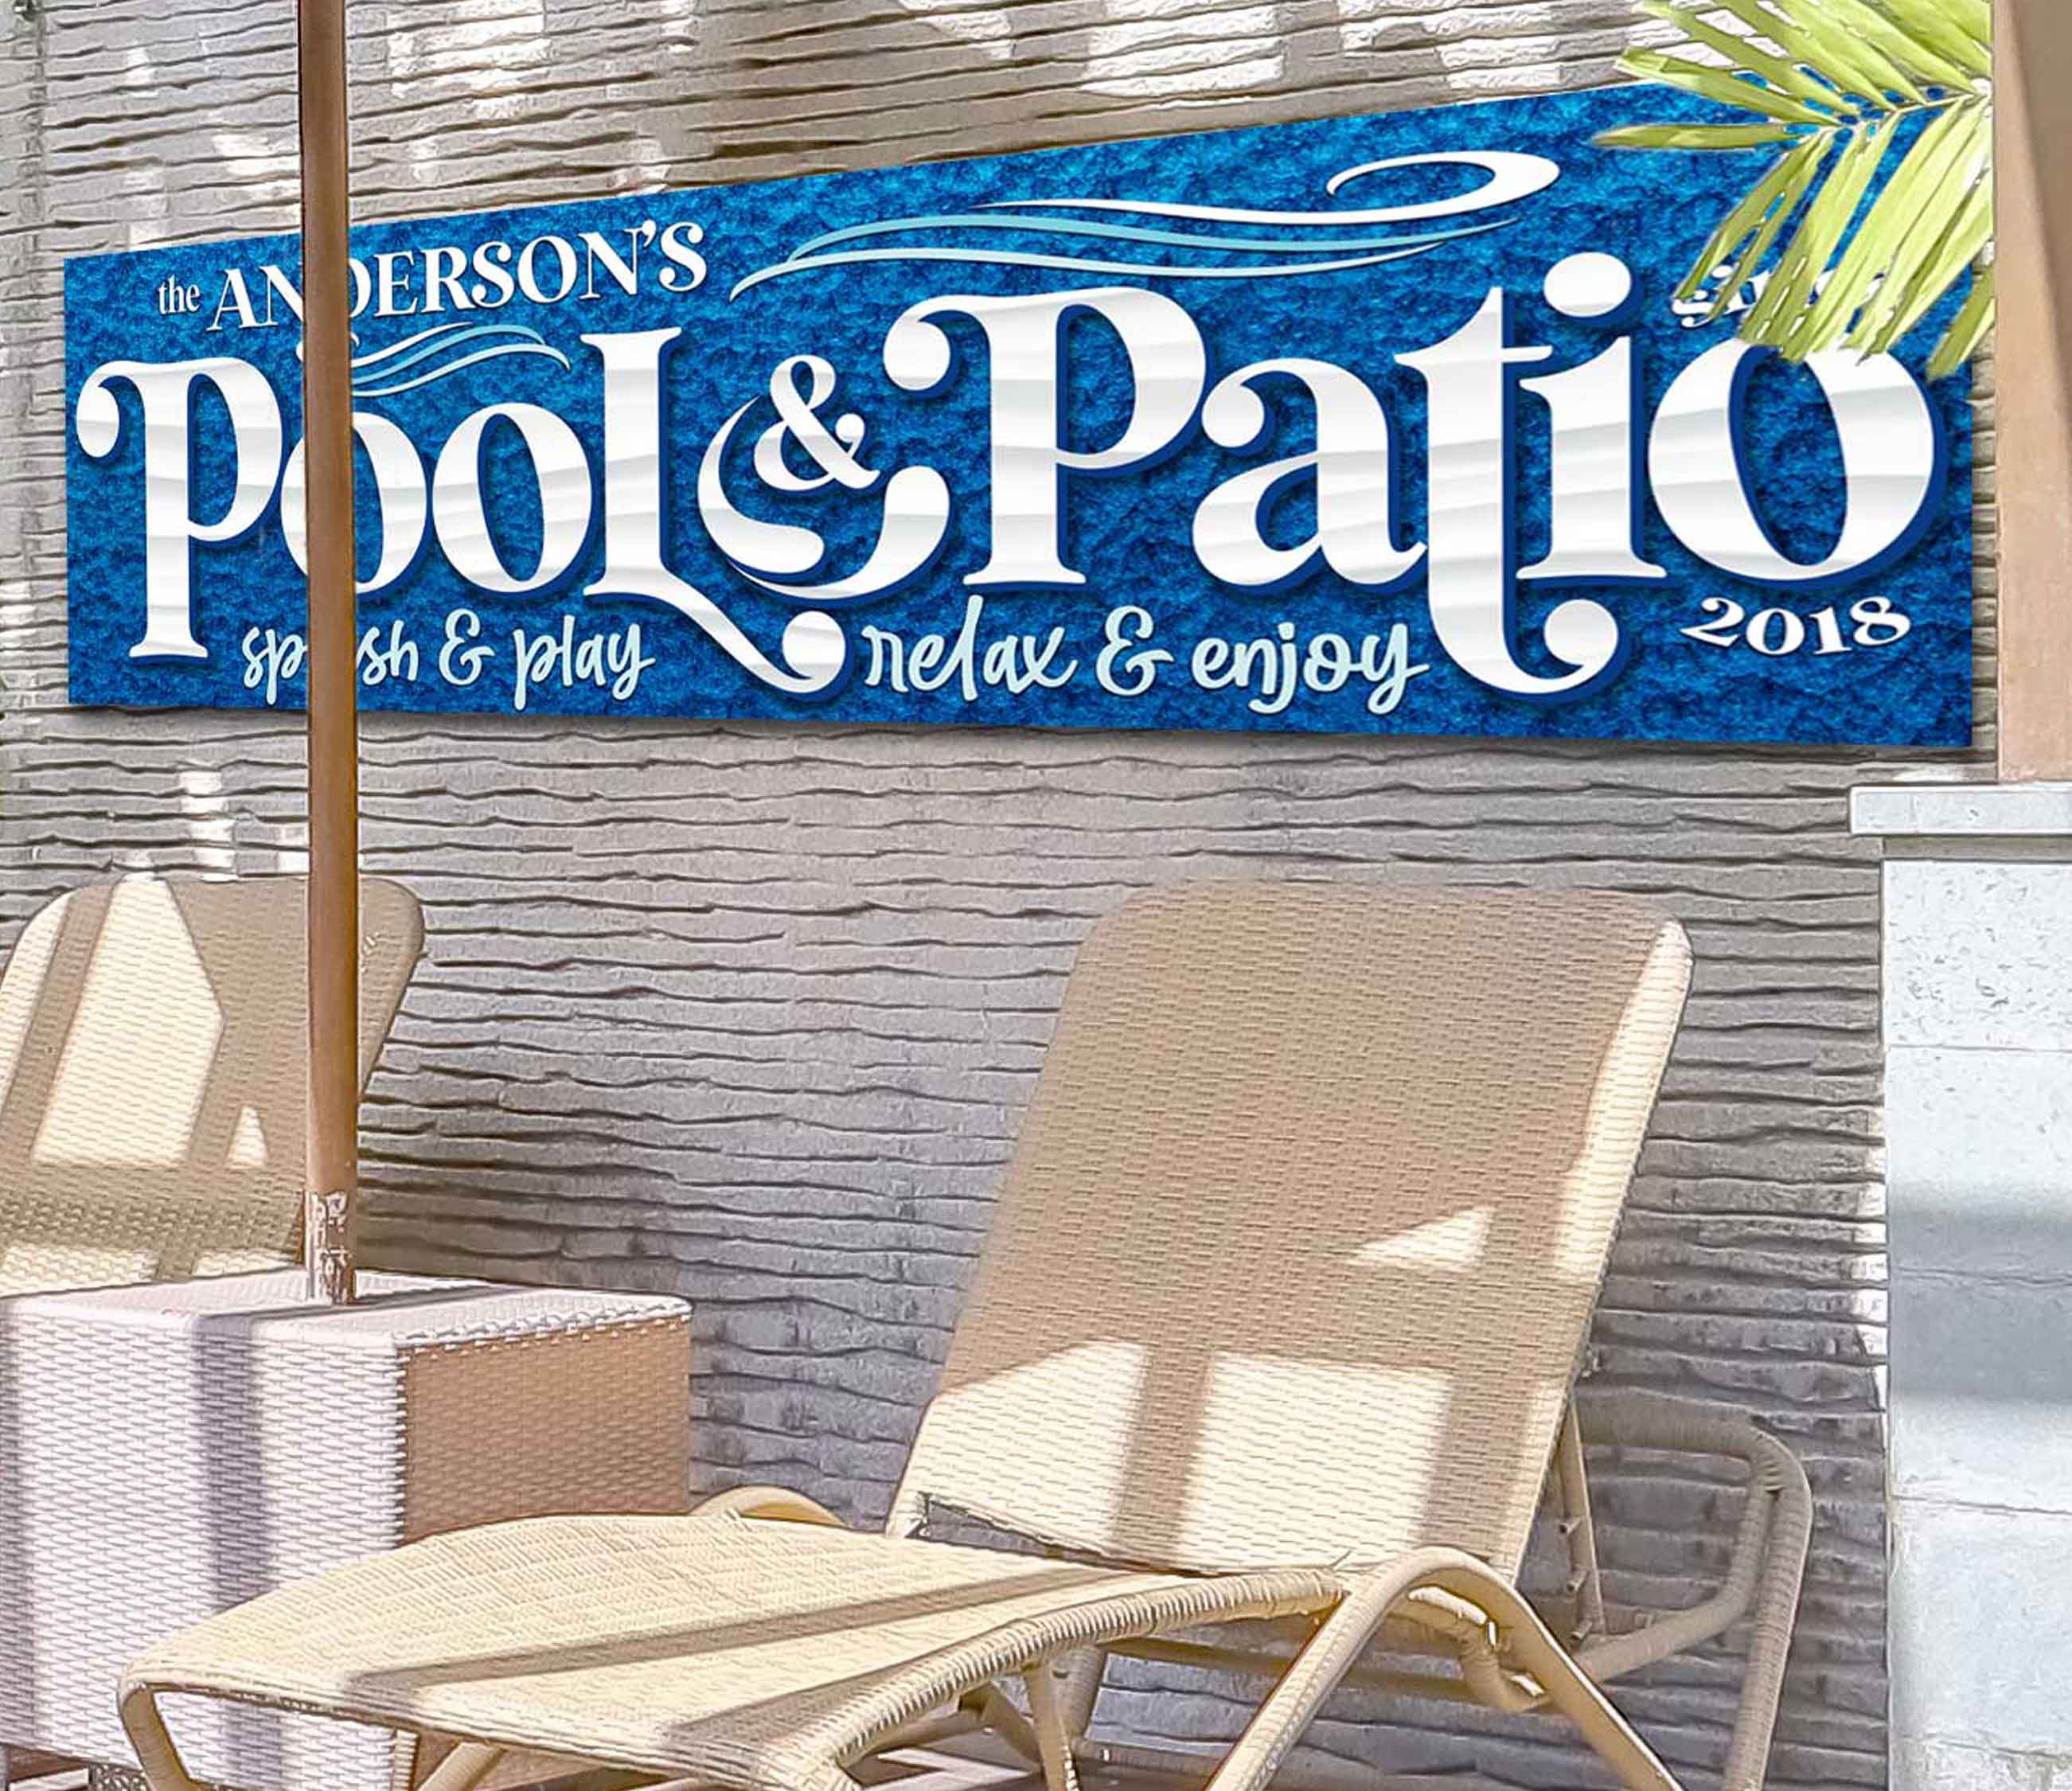 Reads {The [Family name] pool and patio} Splash and Play Relax and Enjoy Est. [Your Year] on blue metal or canvas